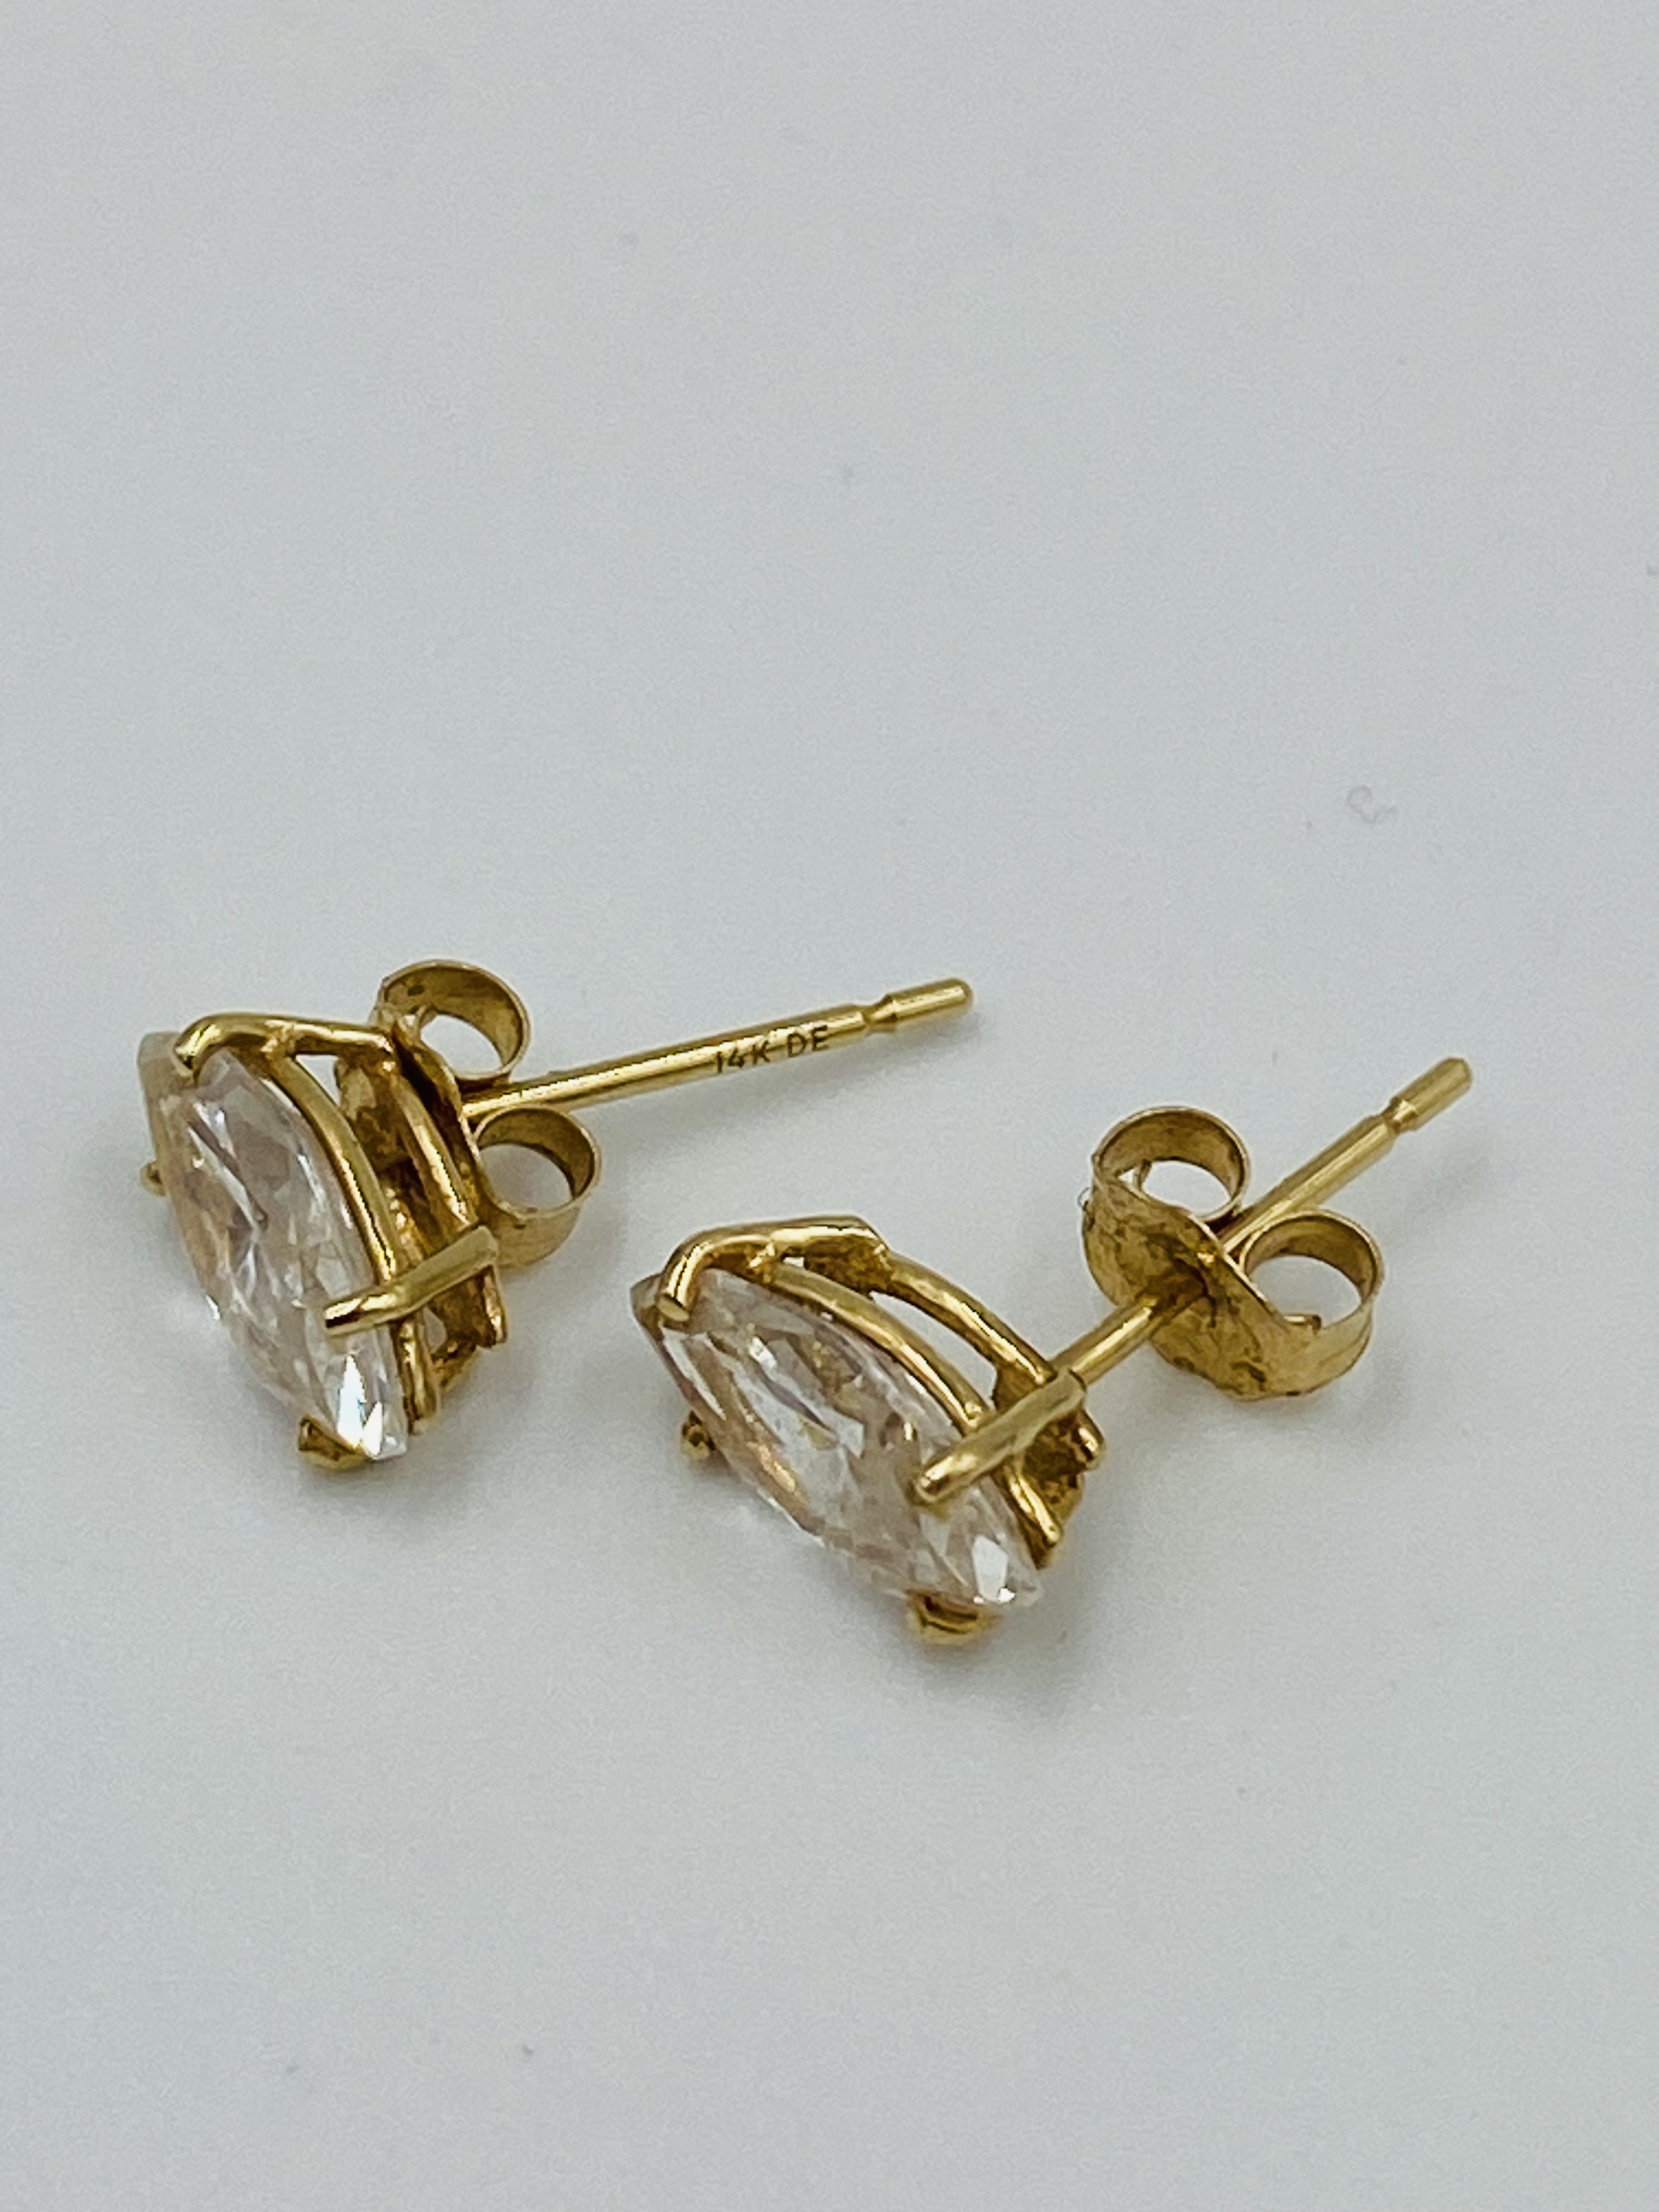 Pair of 14ct gold earrings set with a white stone - Image 2 of 4